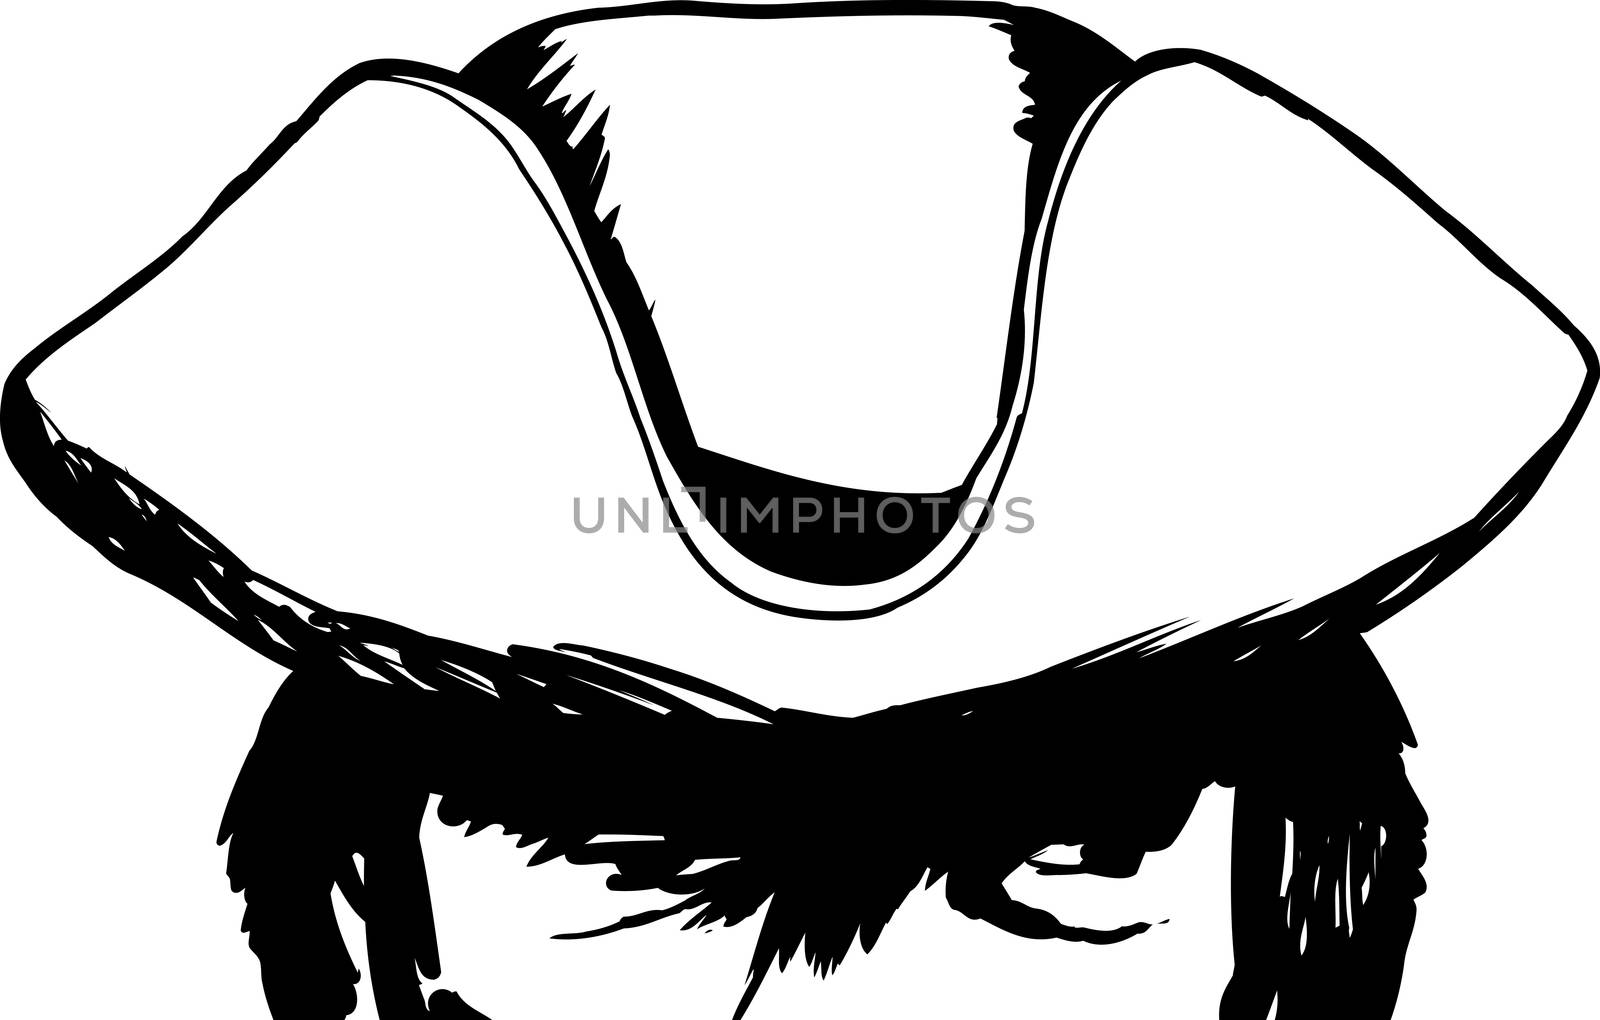 Outlined shadowed eyes of man in tricorn hat by TheBlackRhino